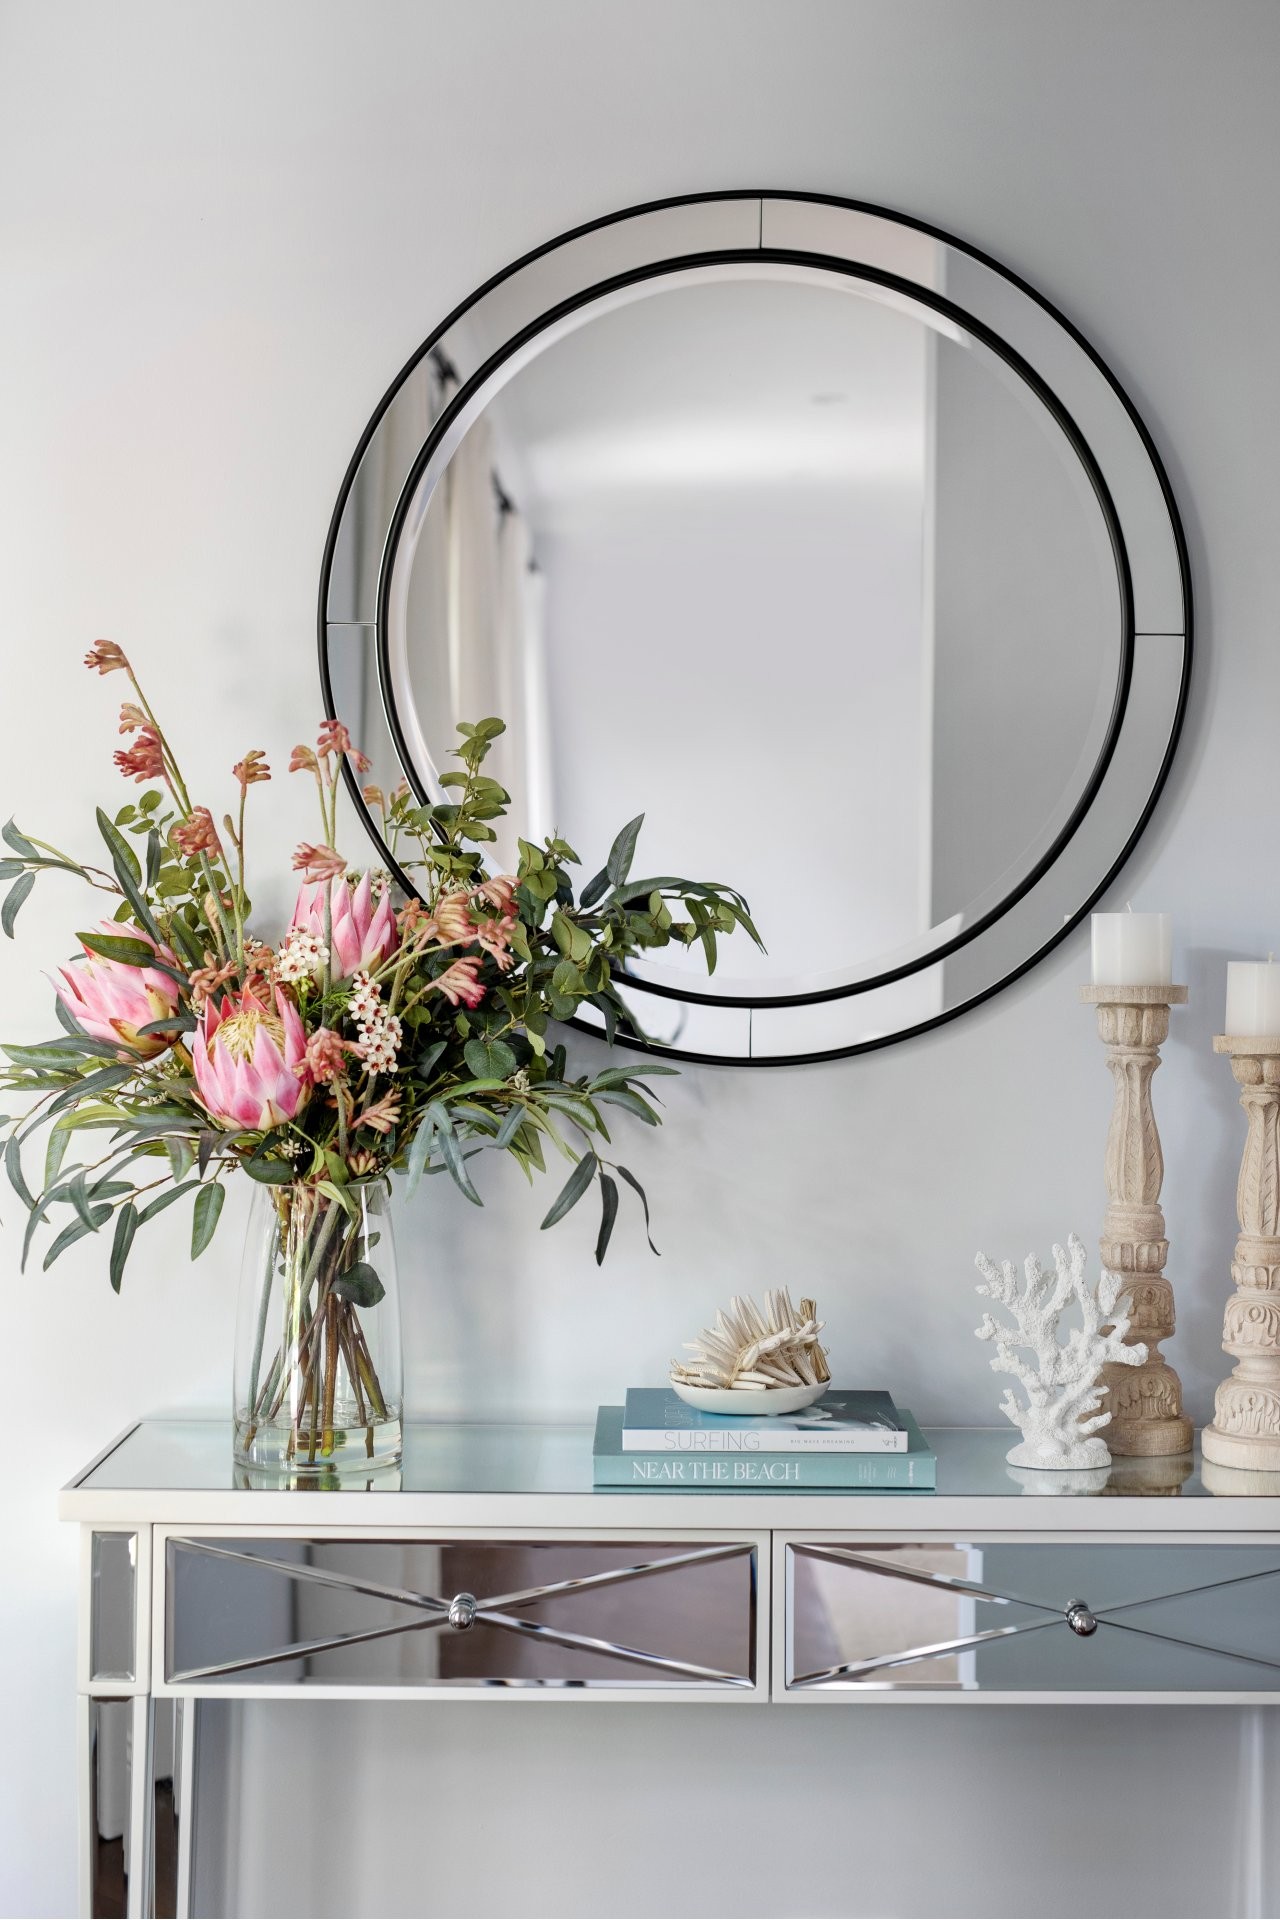 small mirror console table in entry with round mirror and pink flowers in glass vase